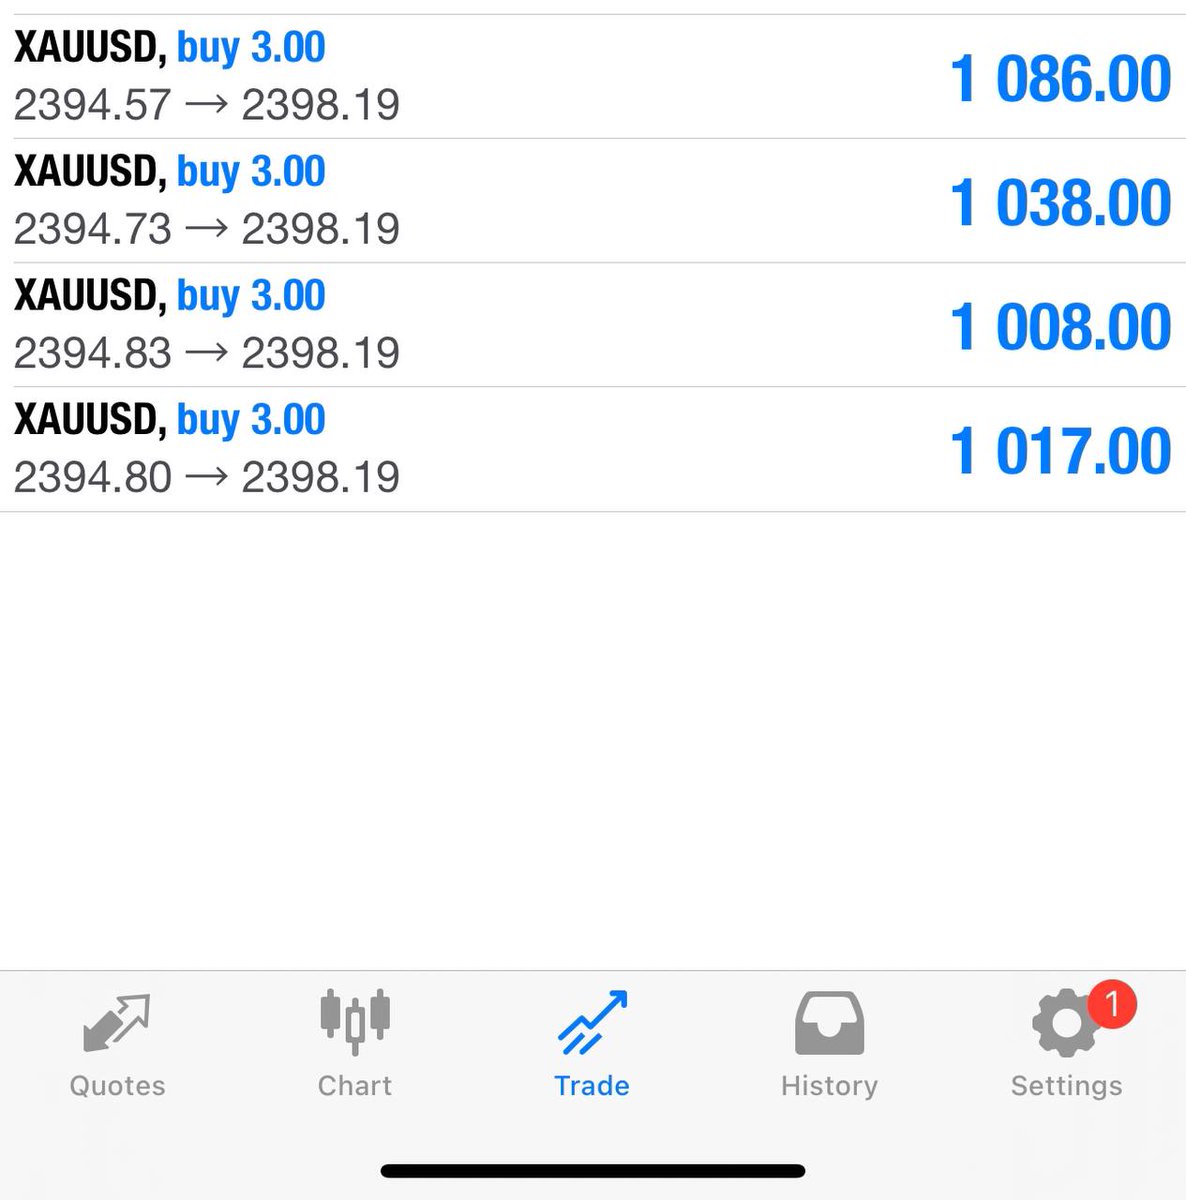 40pips✅

I've shared my personal entries and my zone when I drop the setup‼️

Everyone profited from my setup?

#gbpjpy #Gold #usoil #india #Eurusd #TradeSmart #Chfjpy #forexsignals